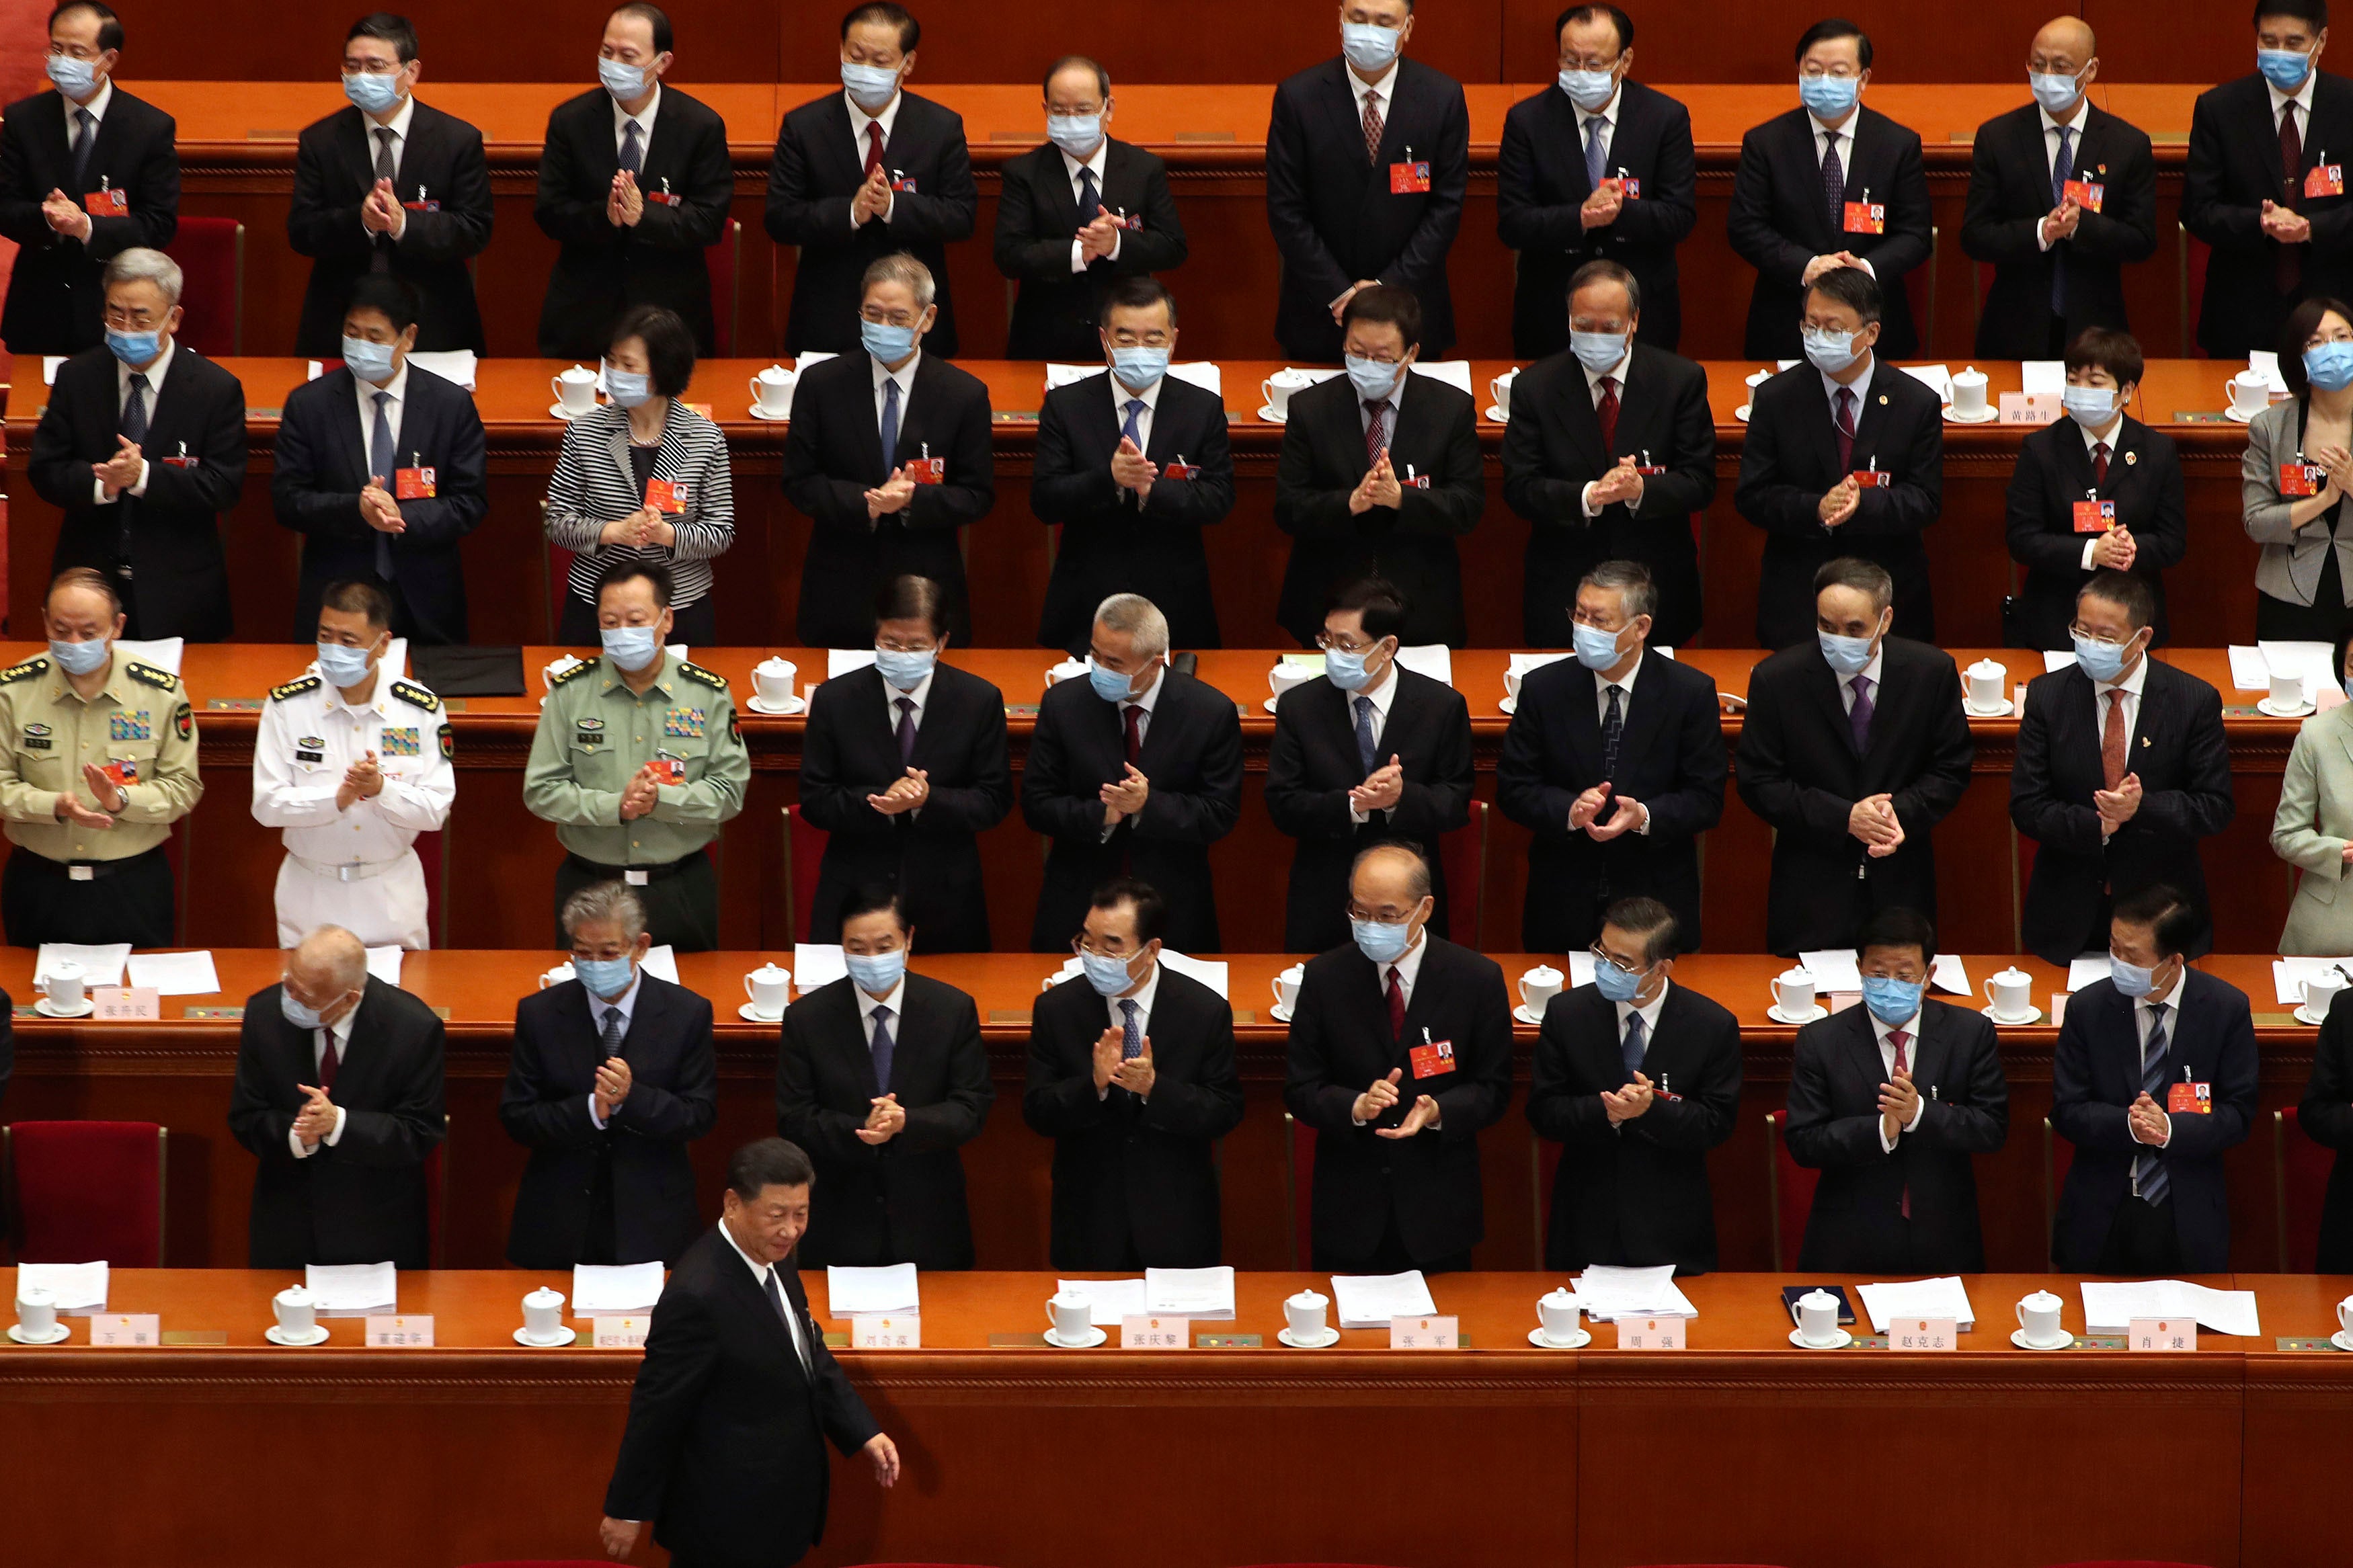 Delegates applaud as Chinese President Xi Jinping arrives for the opening session of China's National People's Congress (NPC) at the Great Hall of the People in Beijing, May 22, 2020.  © 2020 AP Photo/Ng Han Guan, Pool